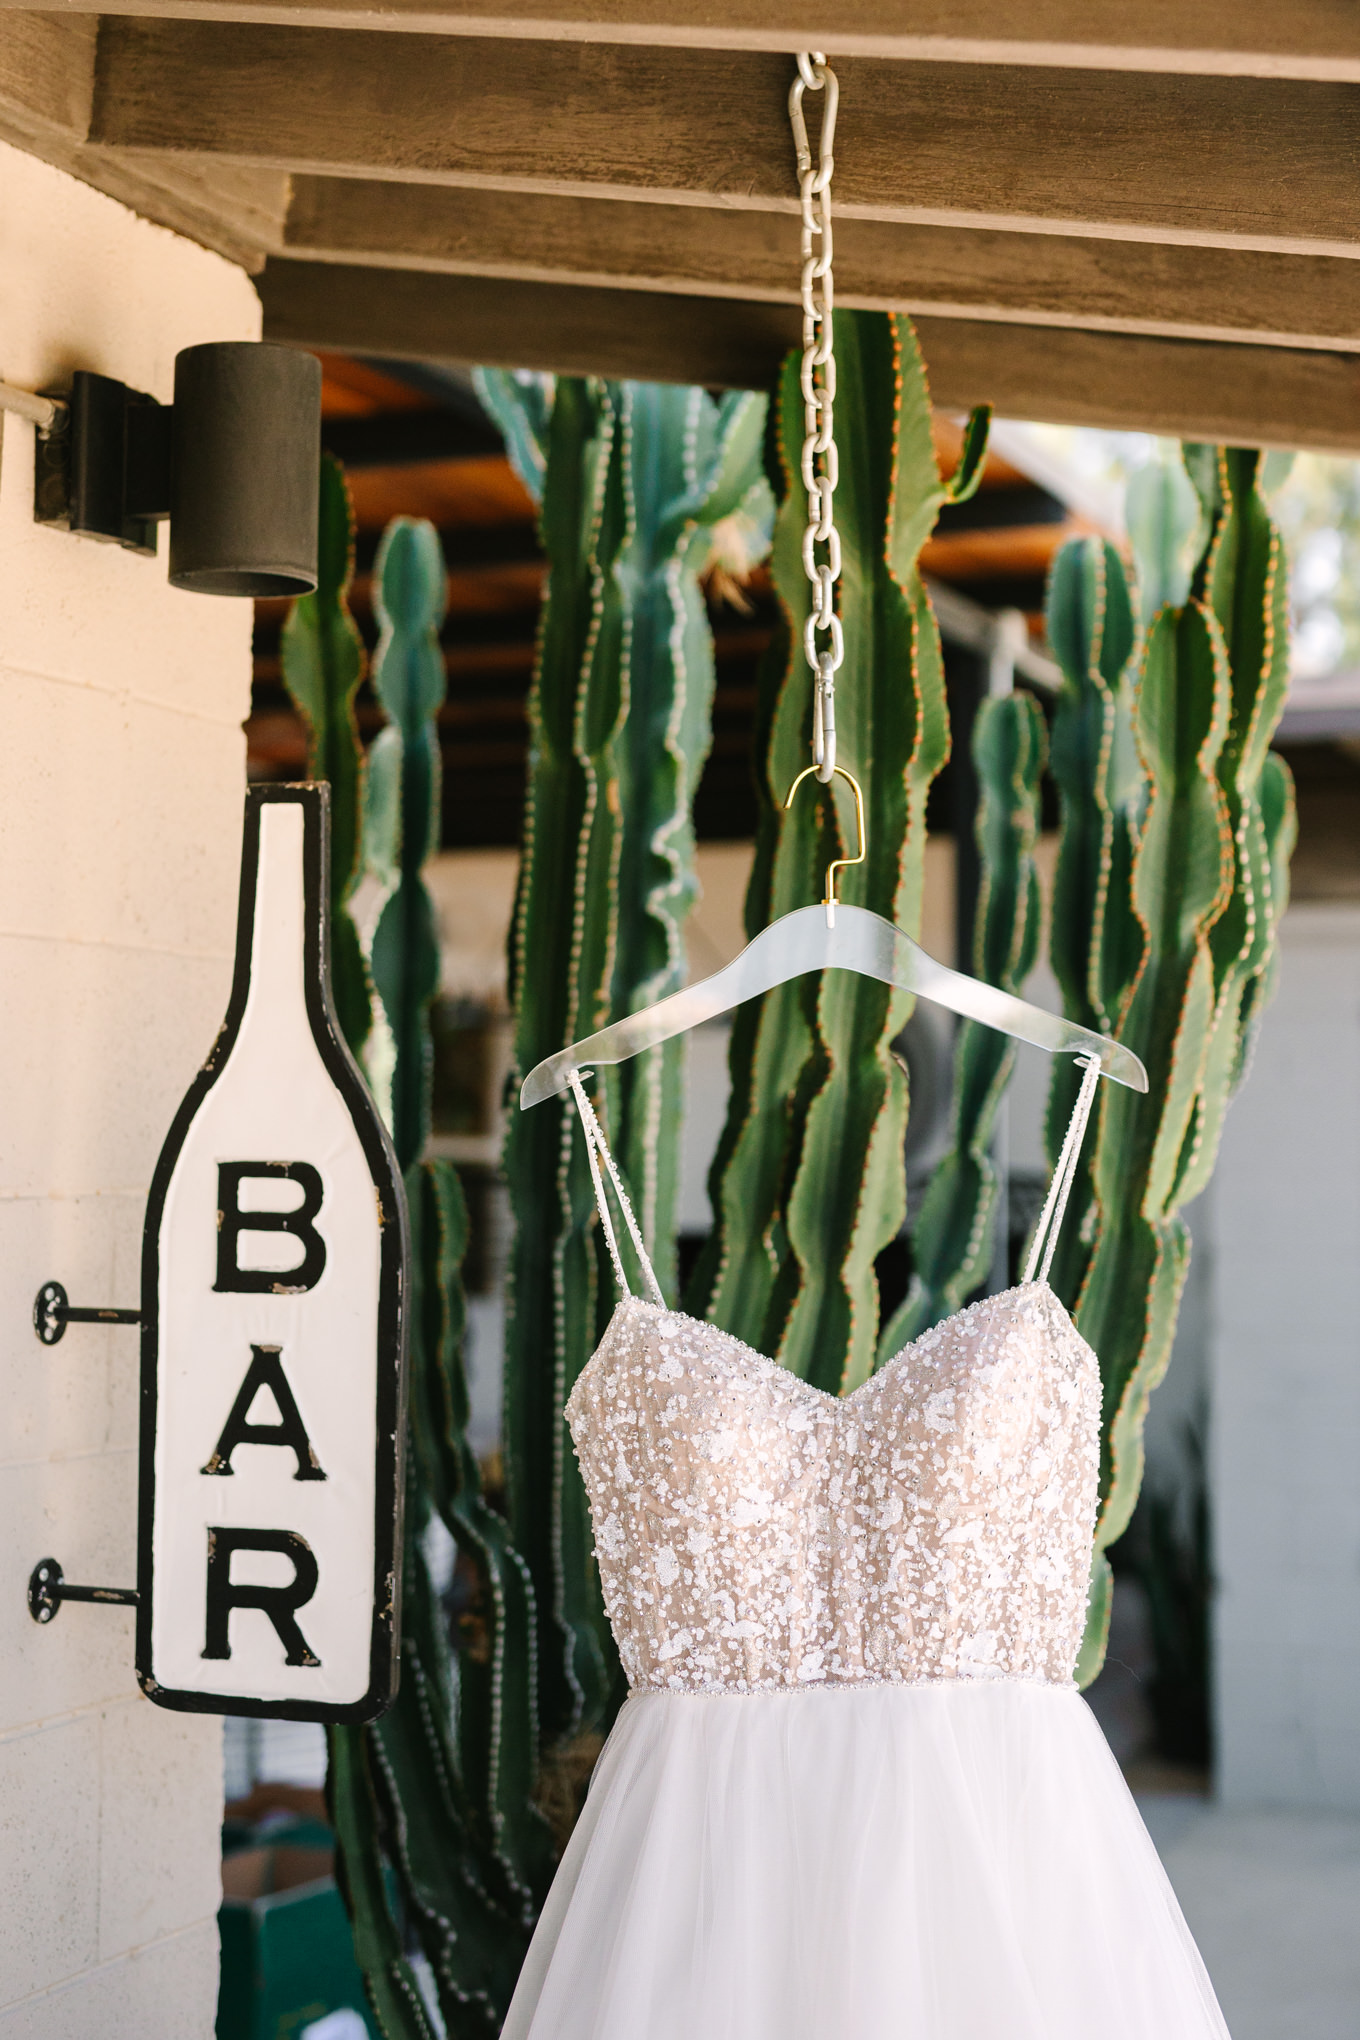 Bridal gown hanging at The Lautner Compound | Pink and orange Lautner Compound wedding | Colorful Palm Springs wedding photography | #palmspringsphotographer #palmspringswedding #lautnercompound #southerncaliforniawedding  Source: Mary Costa Photography | Los Angeles